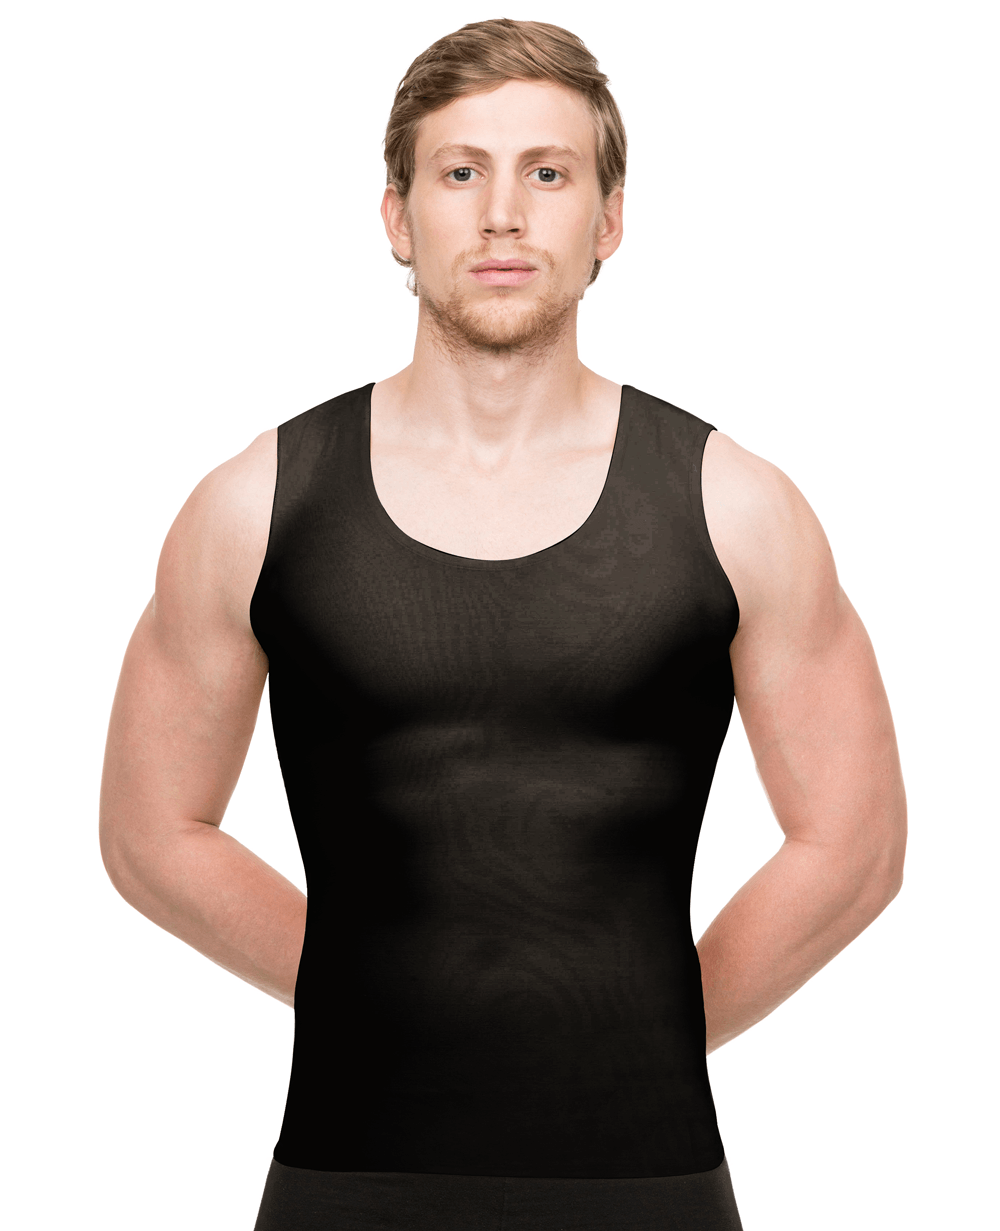 2nd Stage Male Abdominal Cosmetic Surgery Compression Vest (MG04)